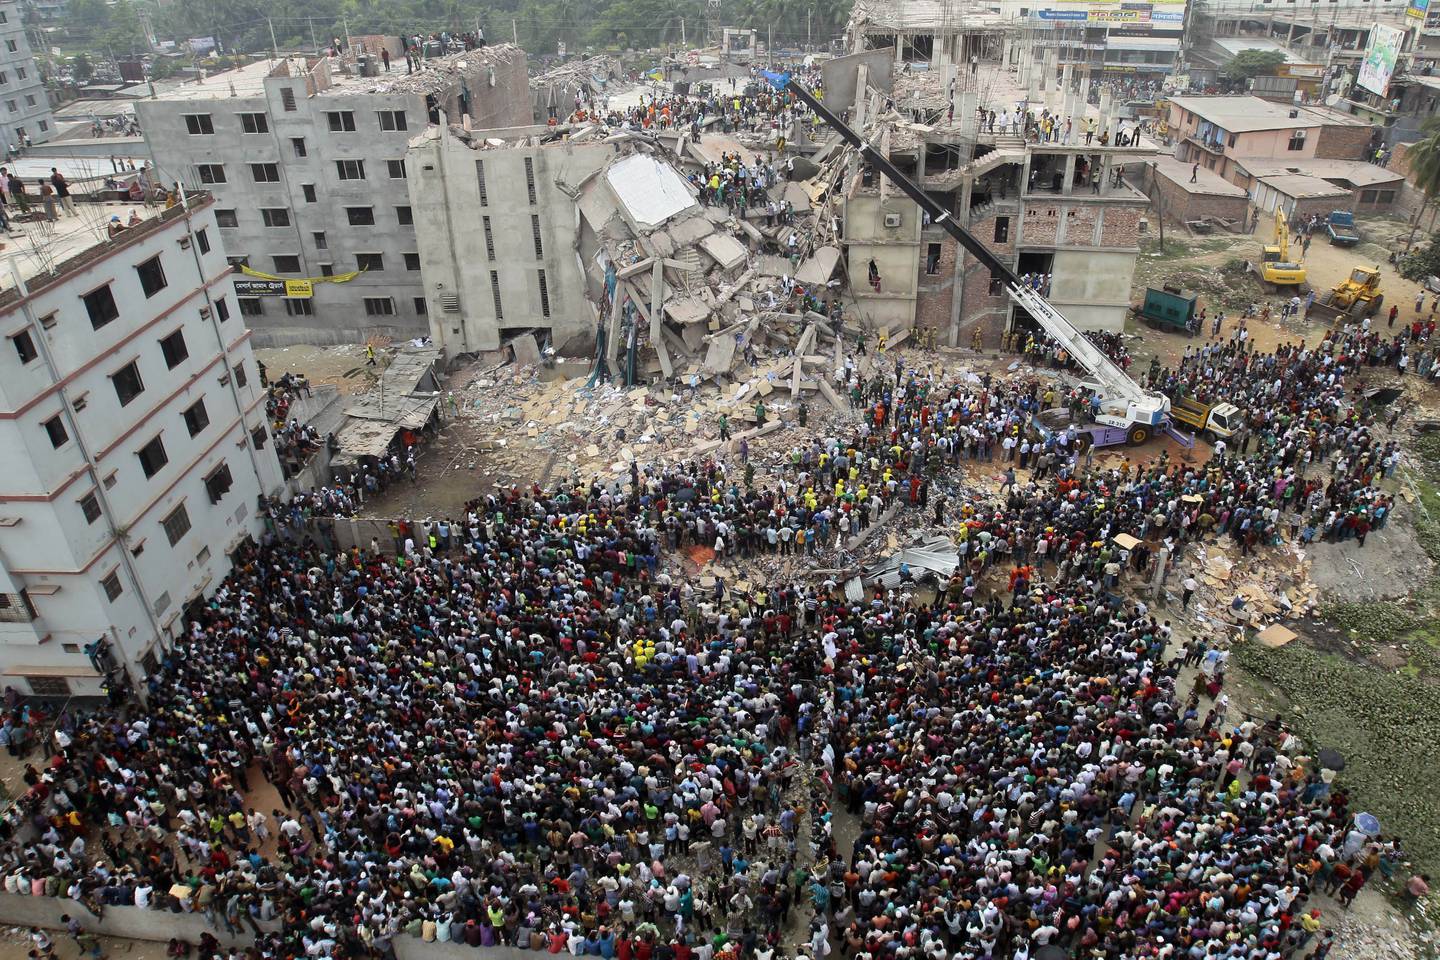 FILE - In this April 25, 2013 file photo, Bangladeshi people gather as rescuers look for survivors and victims at the site of a building that collapsed a day earlier, in Savar, near Dhaka, Bangladesh. A court in Bangladesh's capital accepted murder charges Monday against 41 people including the owner of the Rana Plaza building that collapsed in 2013 and highlighted grim conditions in the country's garment industry.More than 1,100 people, mostly garment factory workers, died when the illegally built complex collapsed in Bangladesh's worst industrial disaster. (AP Photo/A.M.Ahad, File)